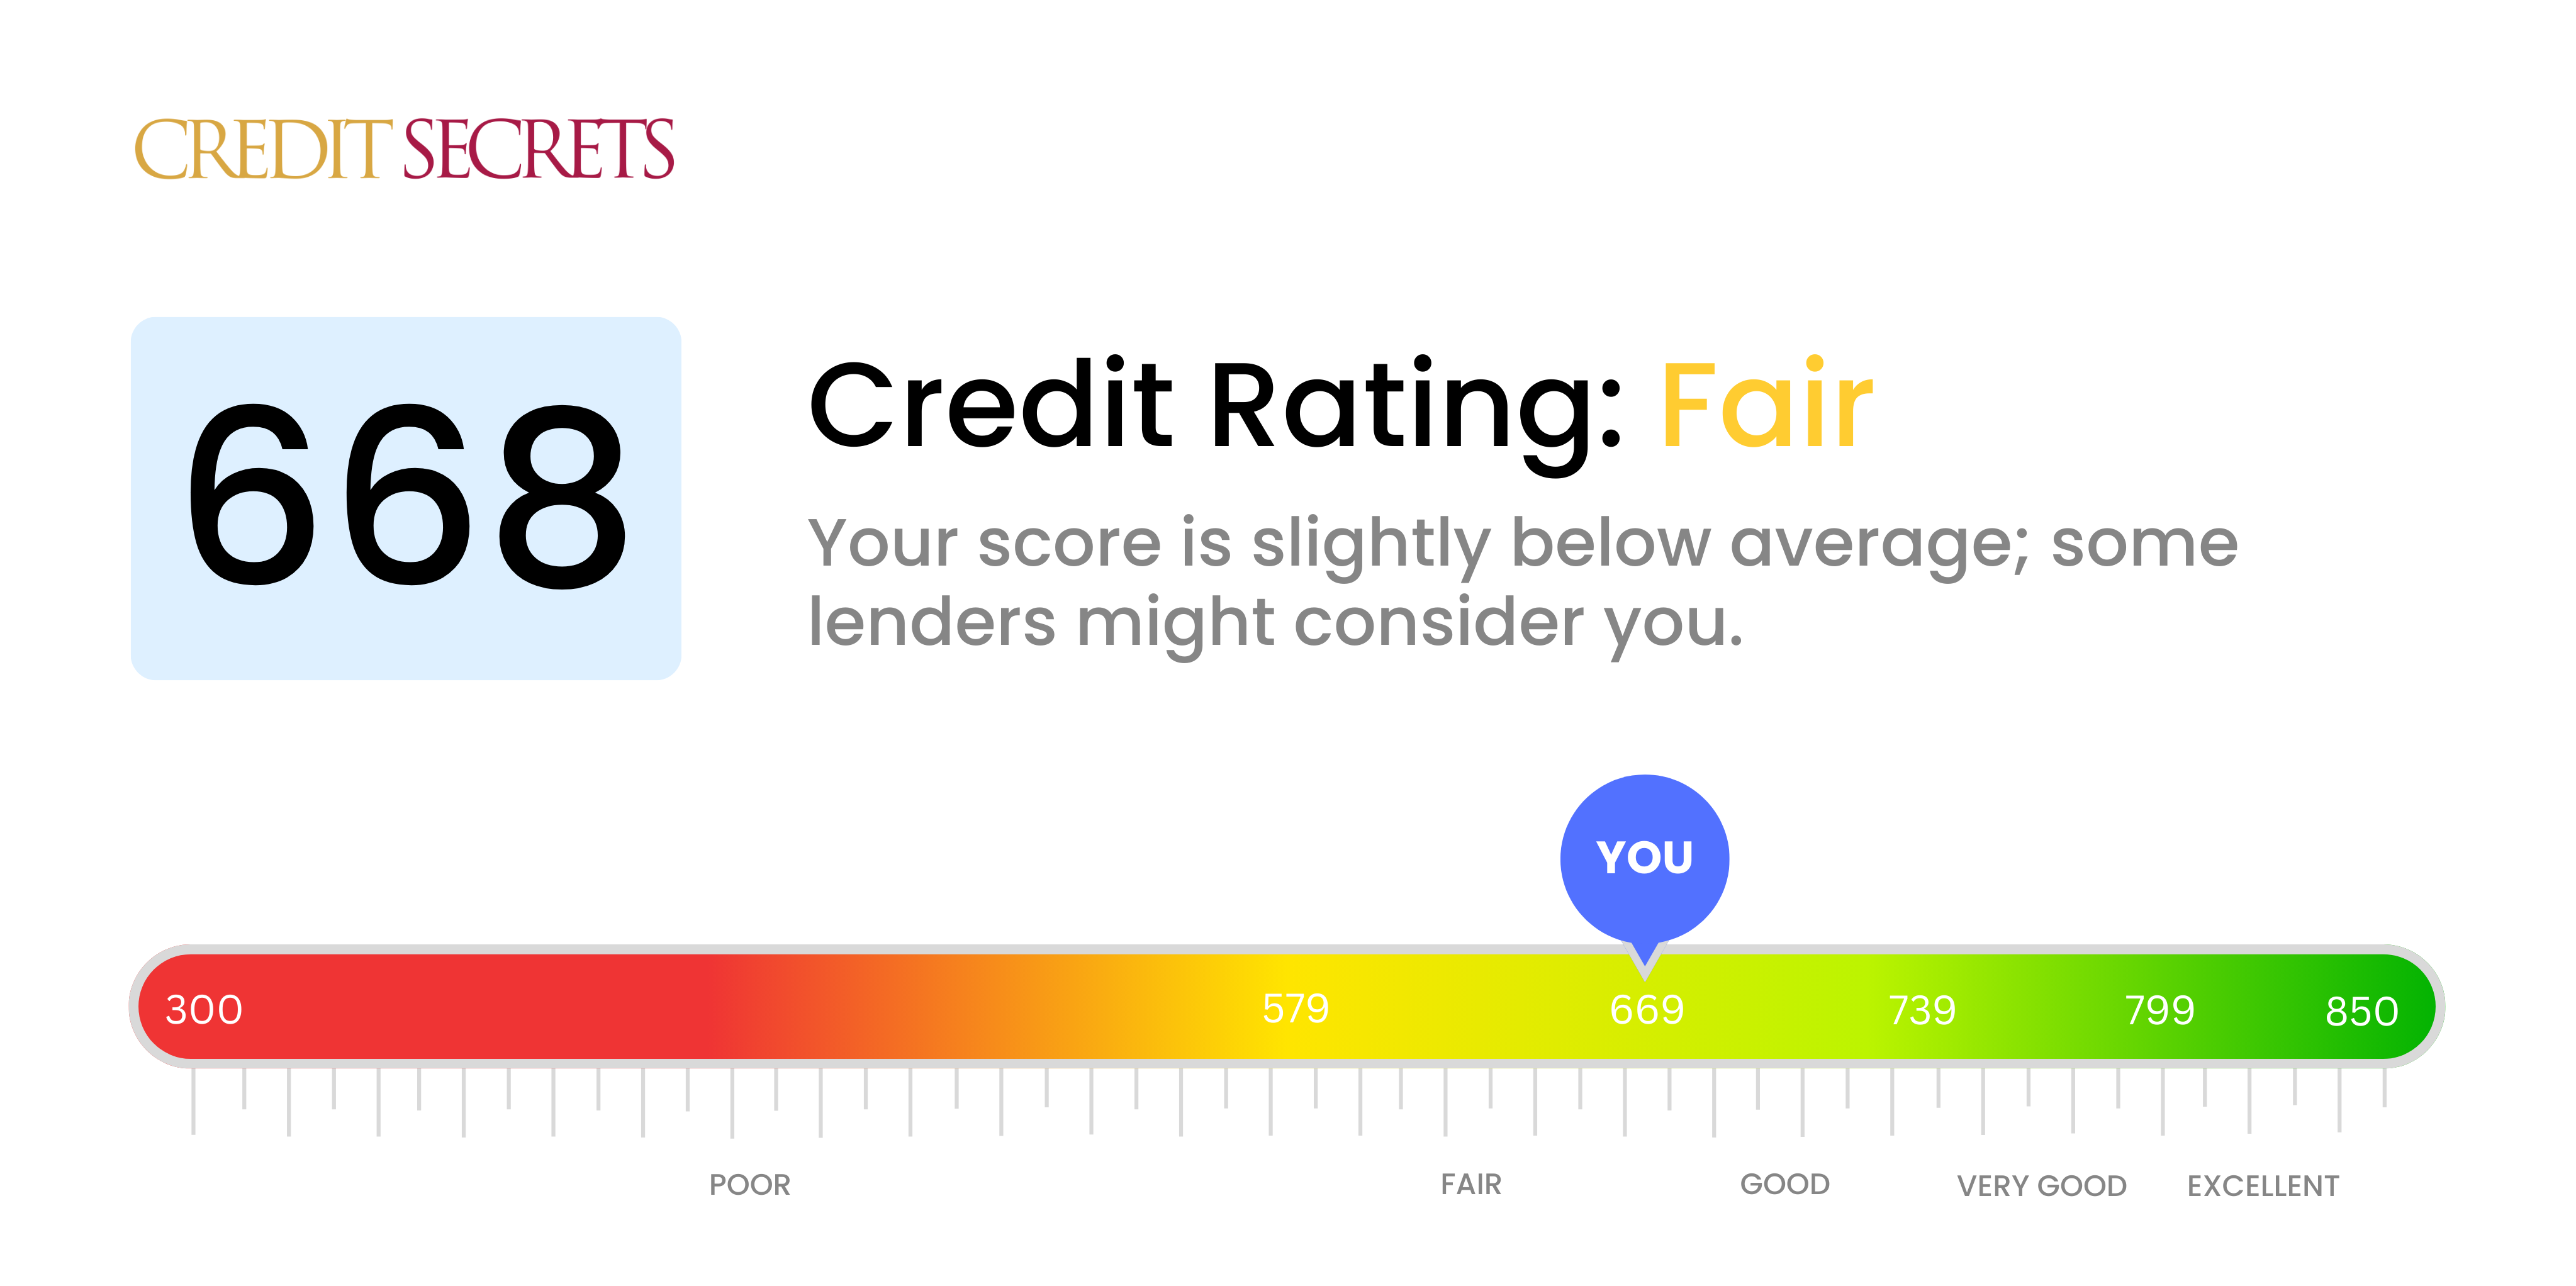 Is 668 a good credit score?